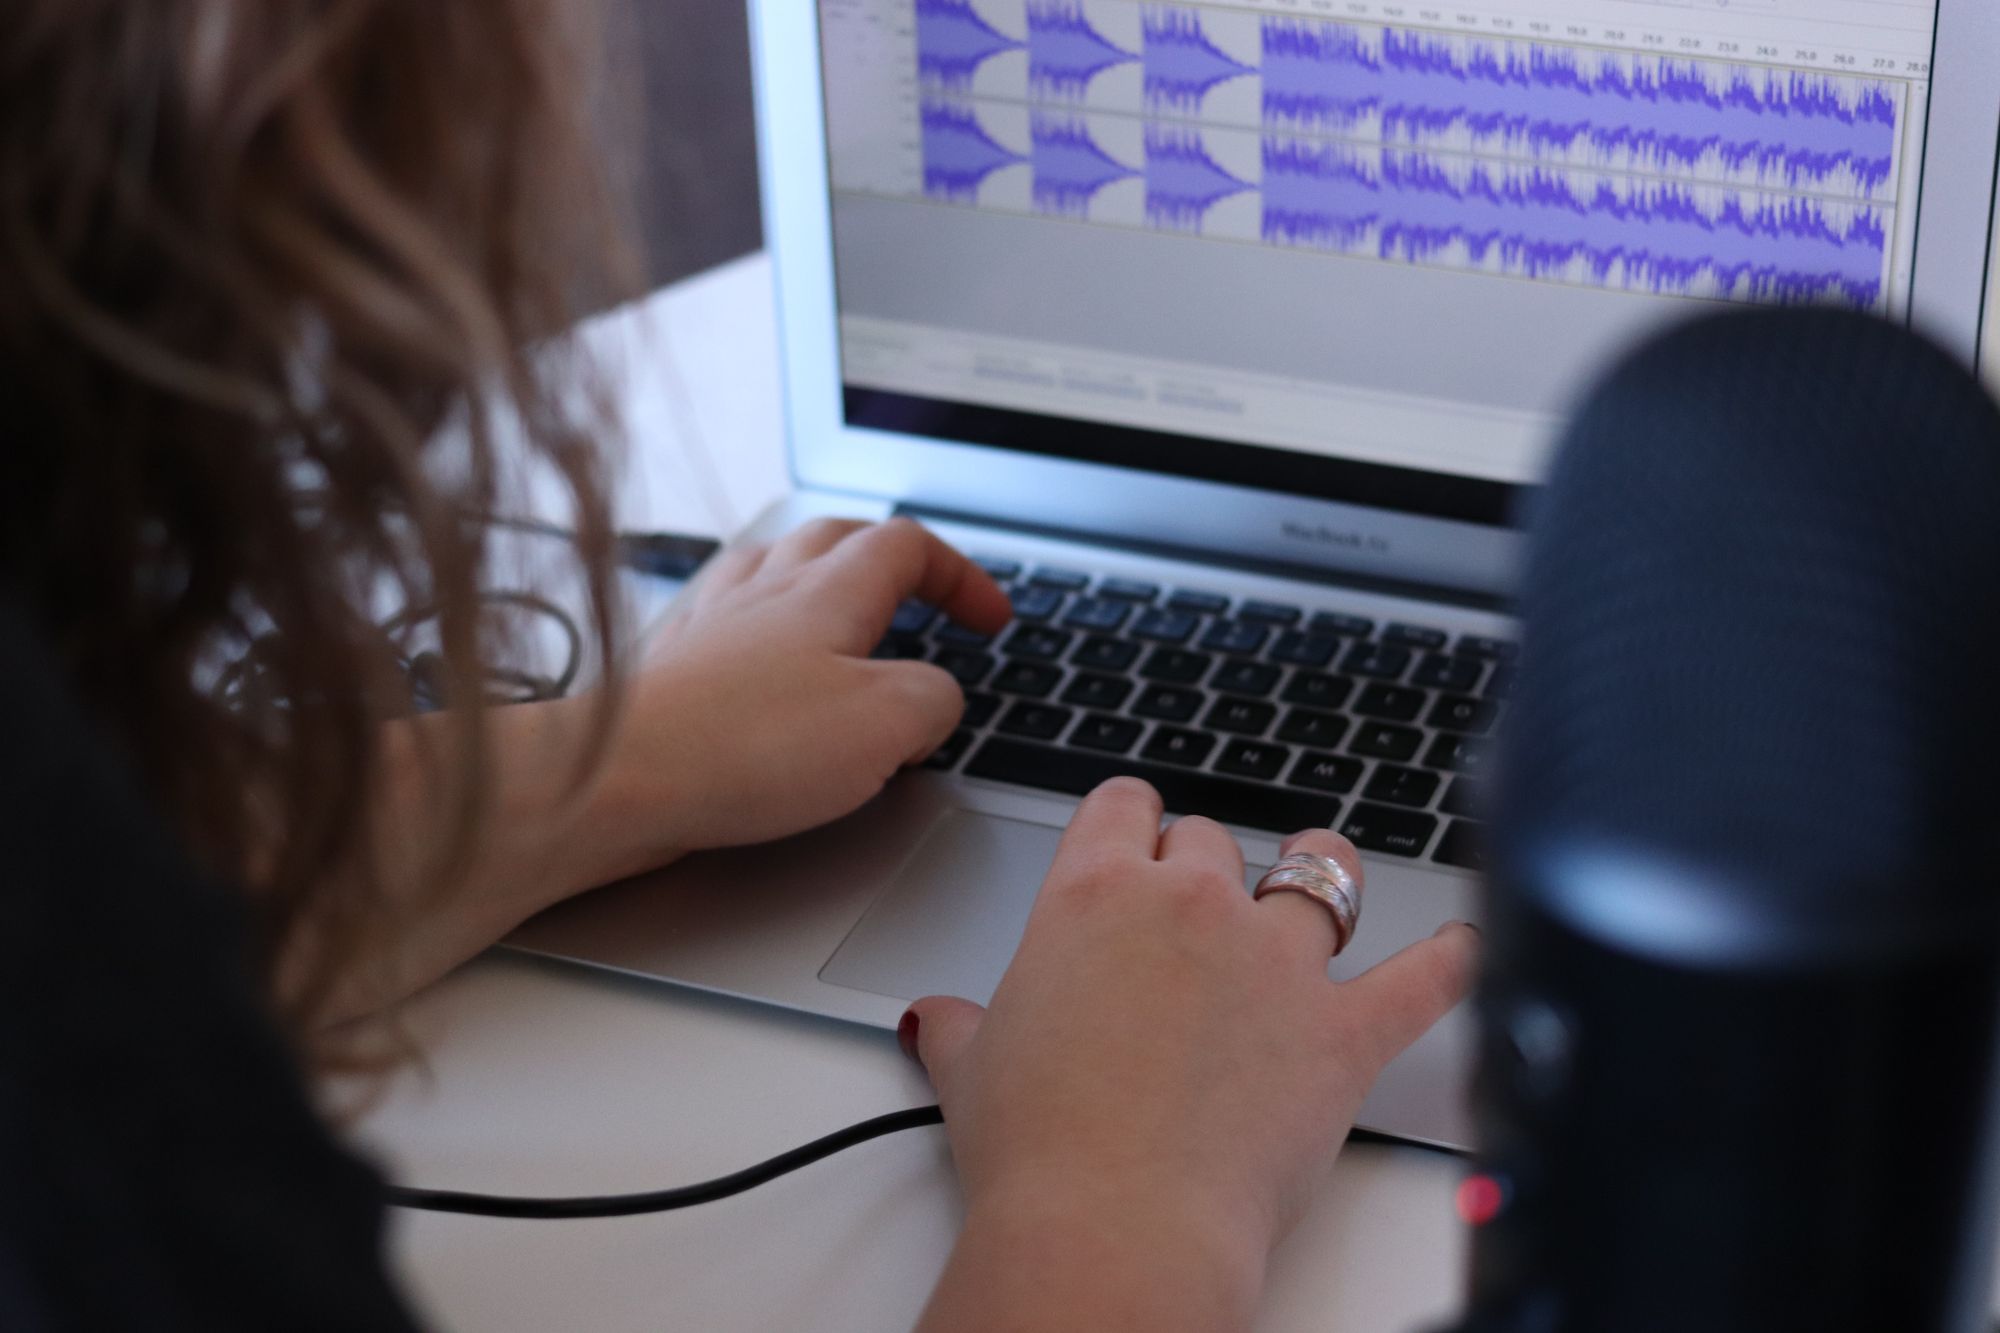 A woman editing audio files in a podcast editing software